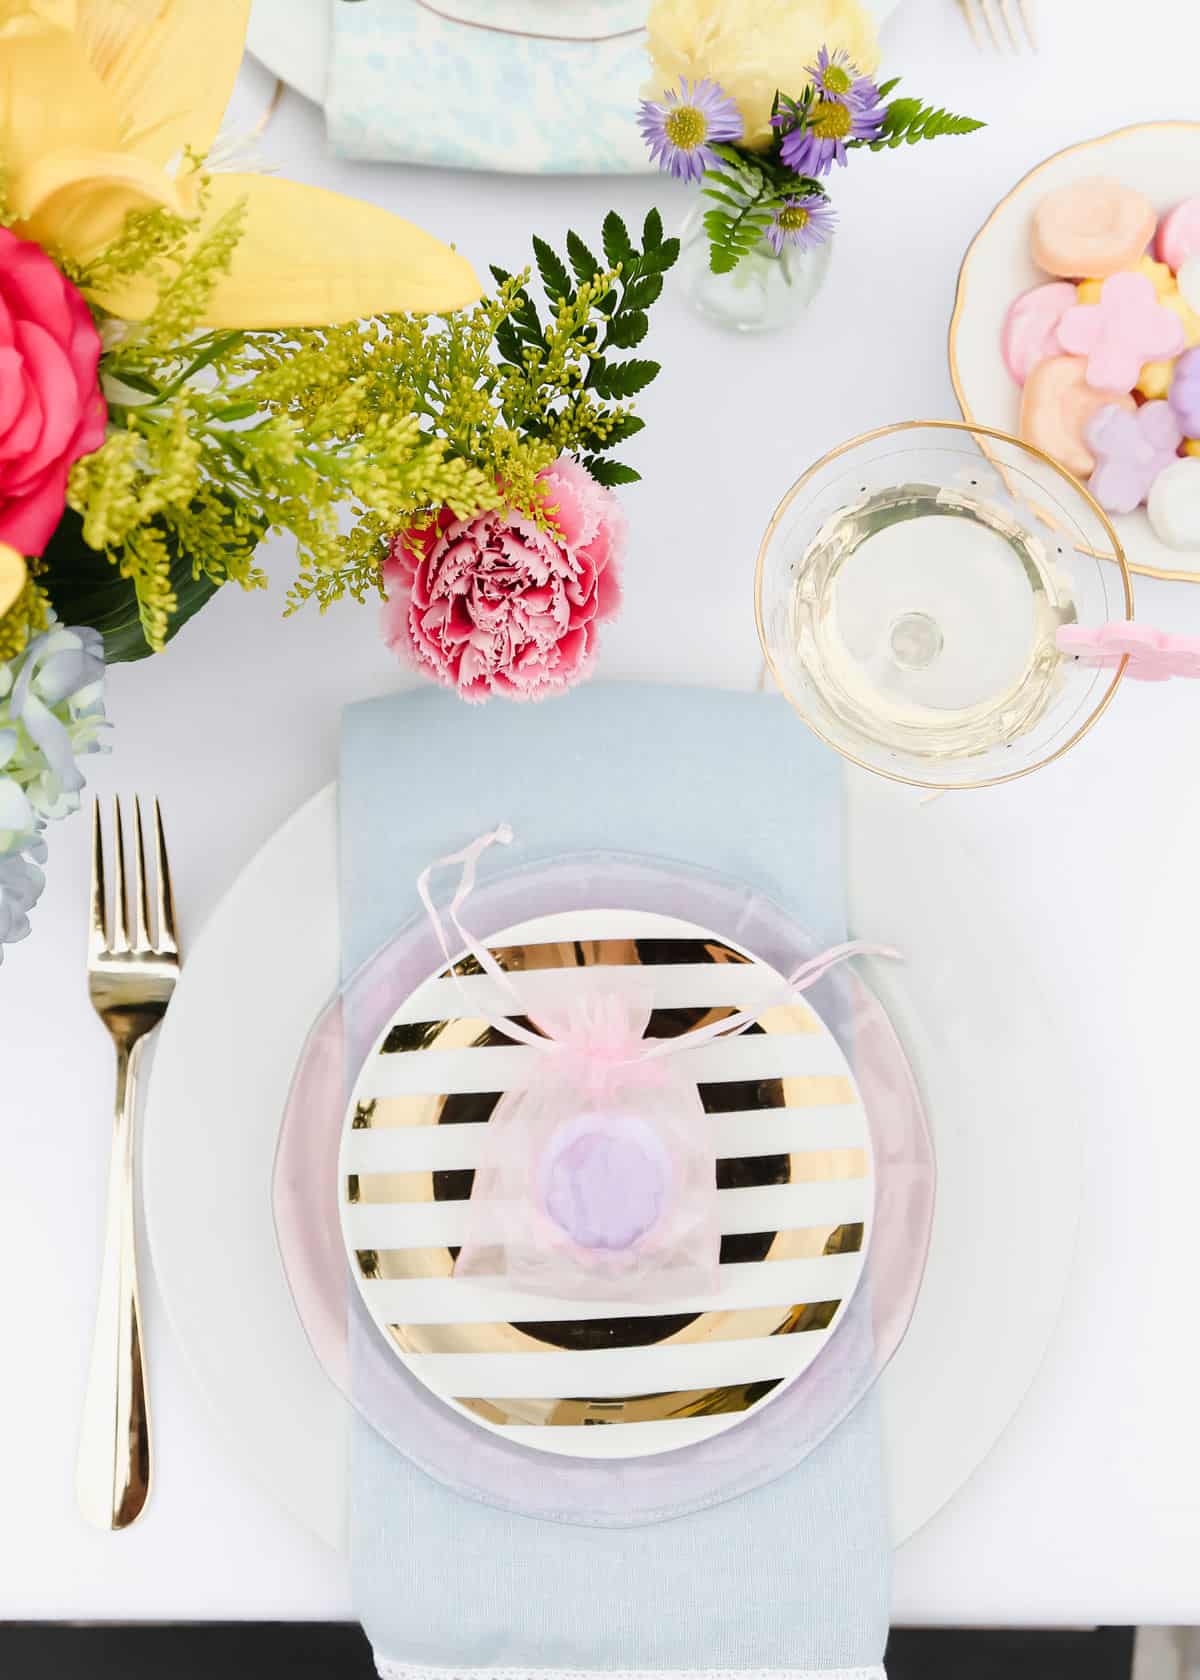 place setting overhead with white plate layered with pink glass plate and gold and white stripe plate with blue napkin.